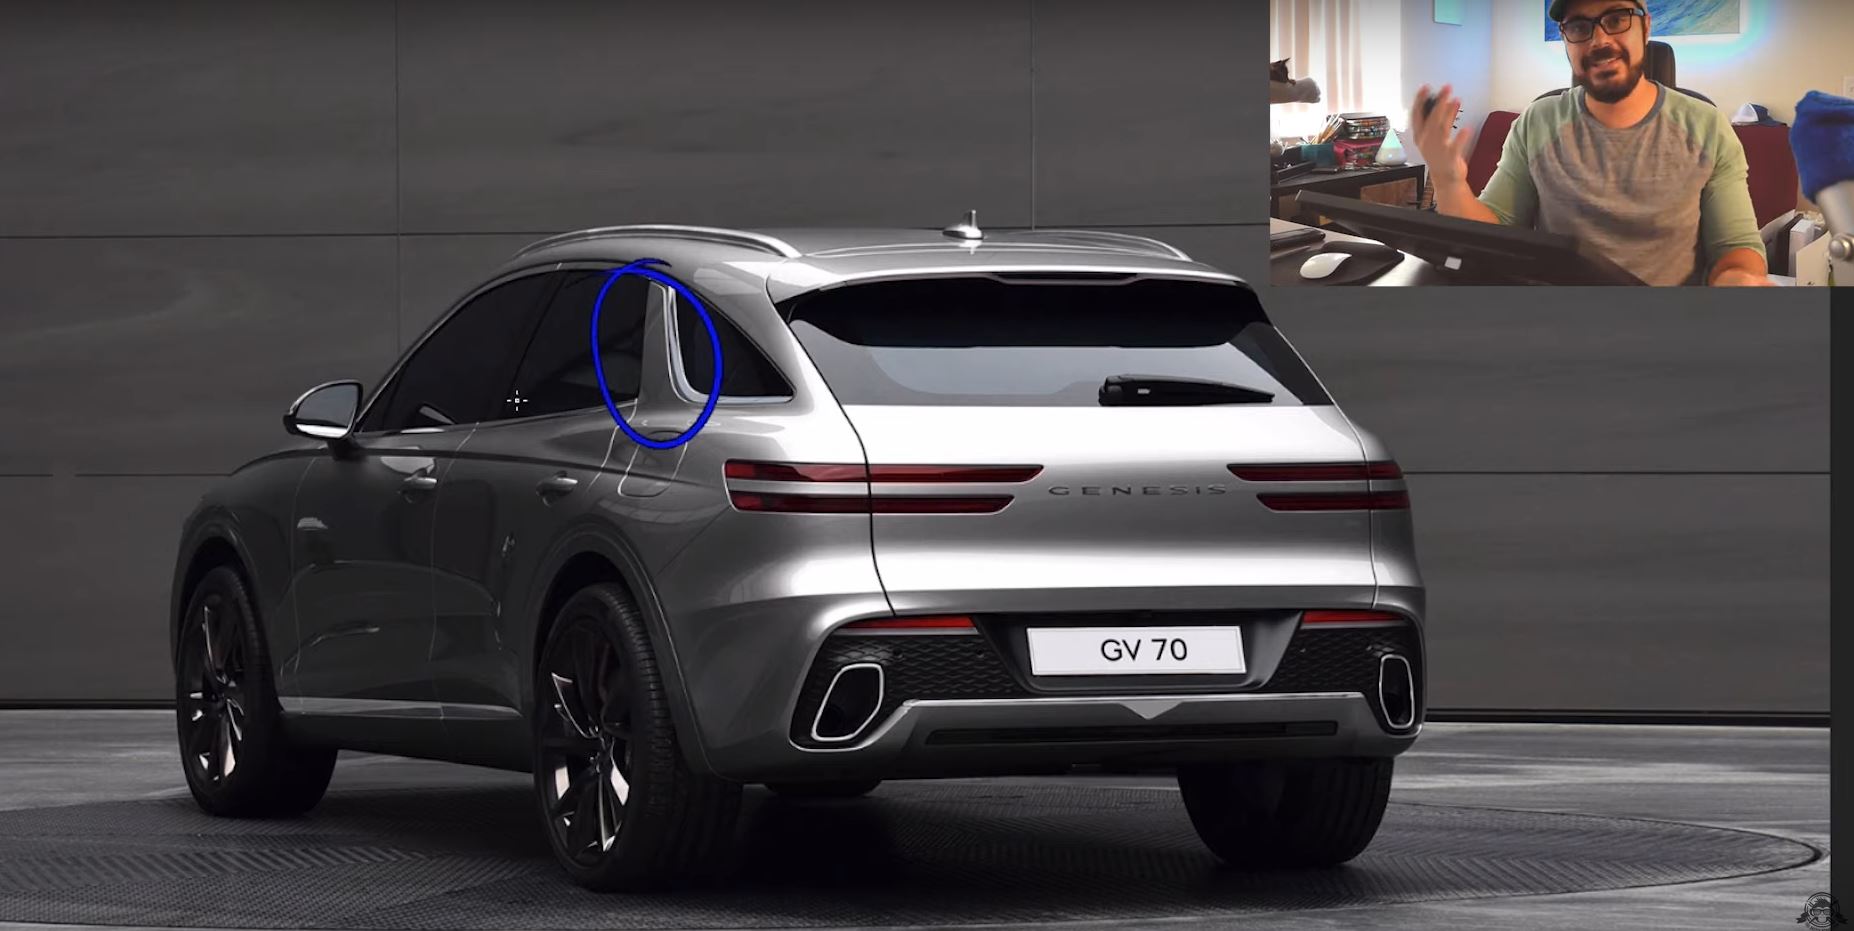 YouTube Artist Proves the Genesis GV70 Is a "Great Looking Porsche